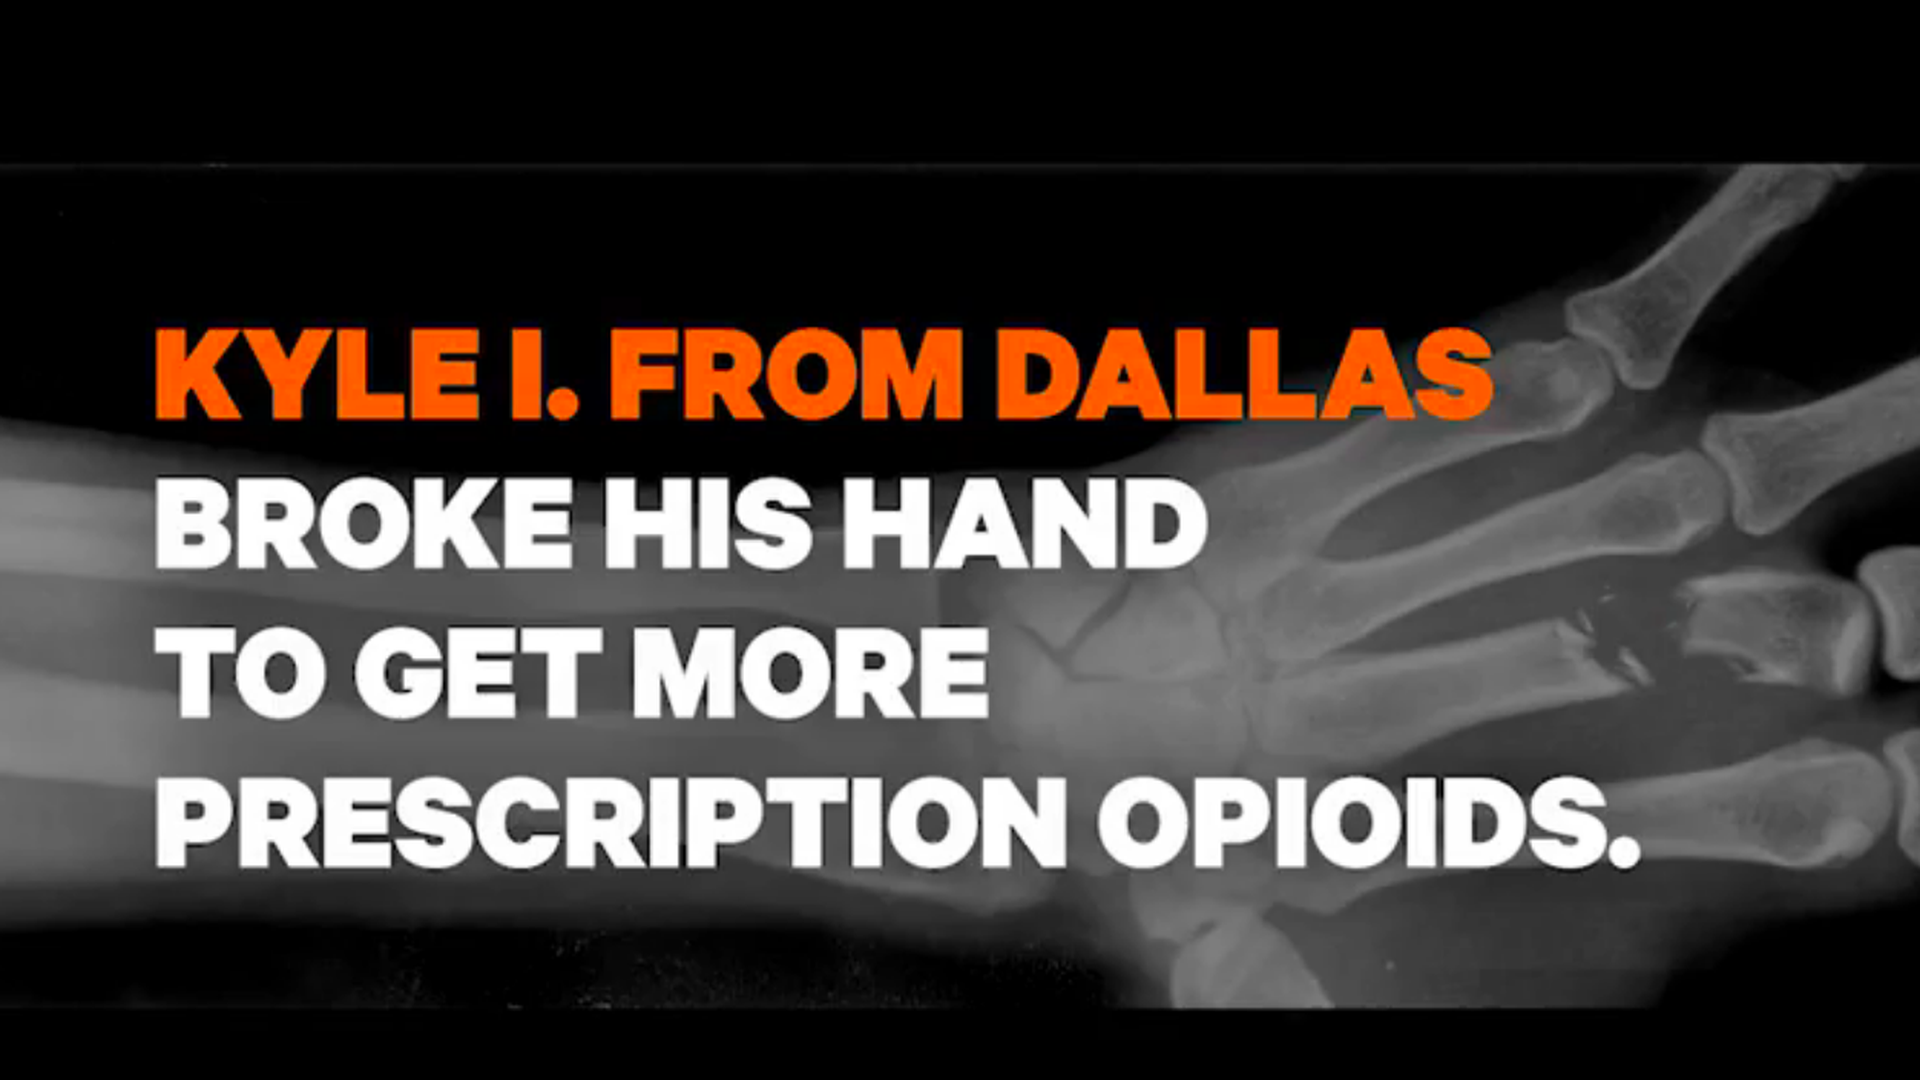 What we're watching: Trump's startling anti-opioid ads - Axios1920 x 1080